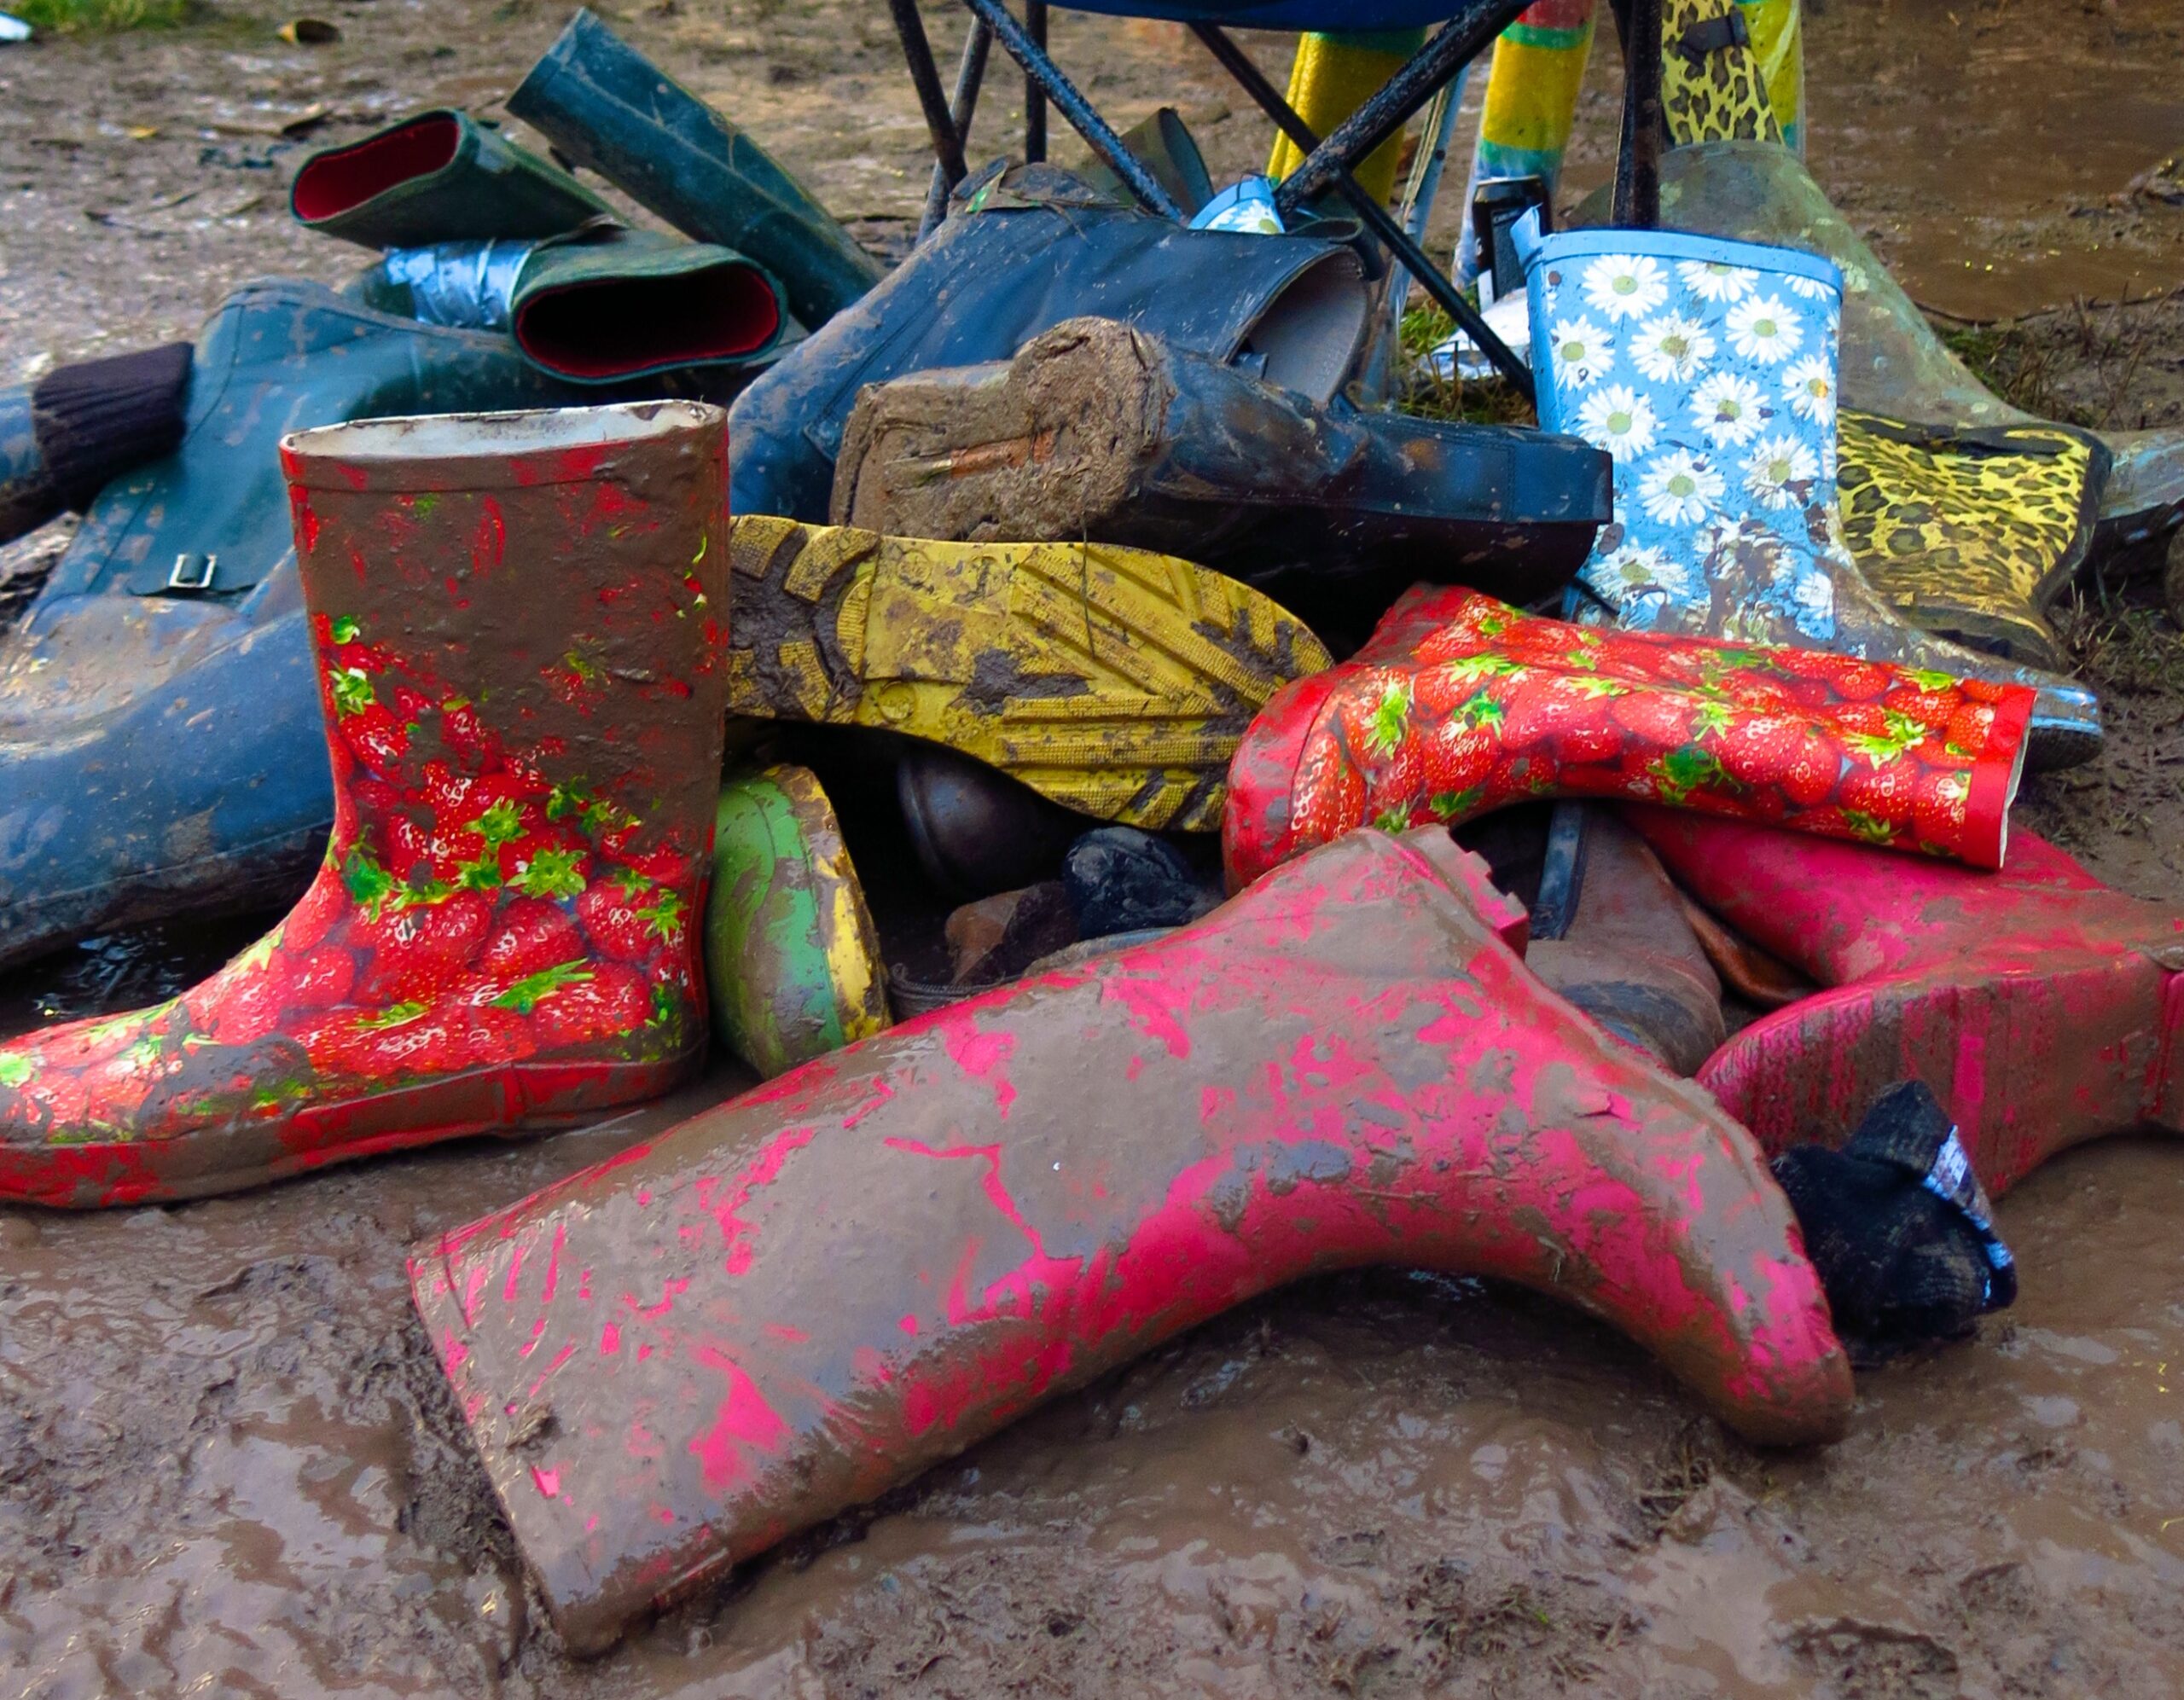 Wellington boots discarded at the Glastonbury Festival.